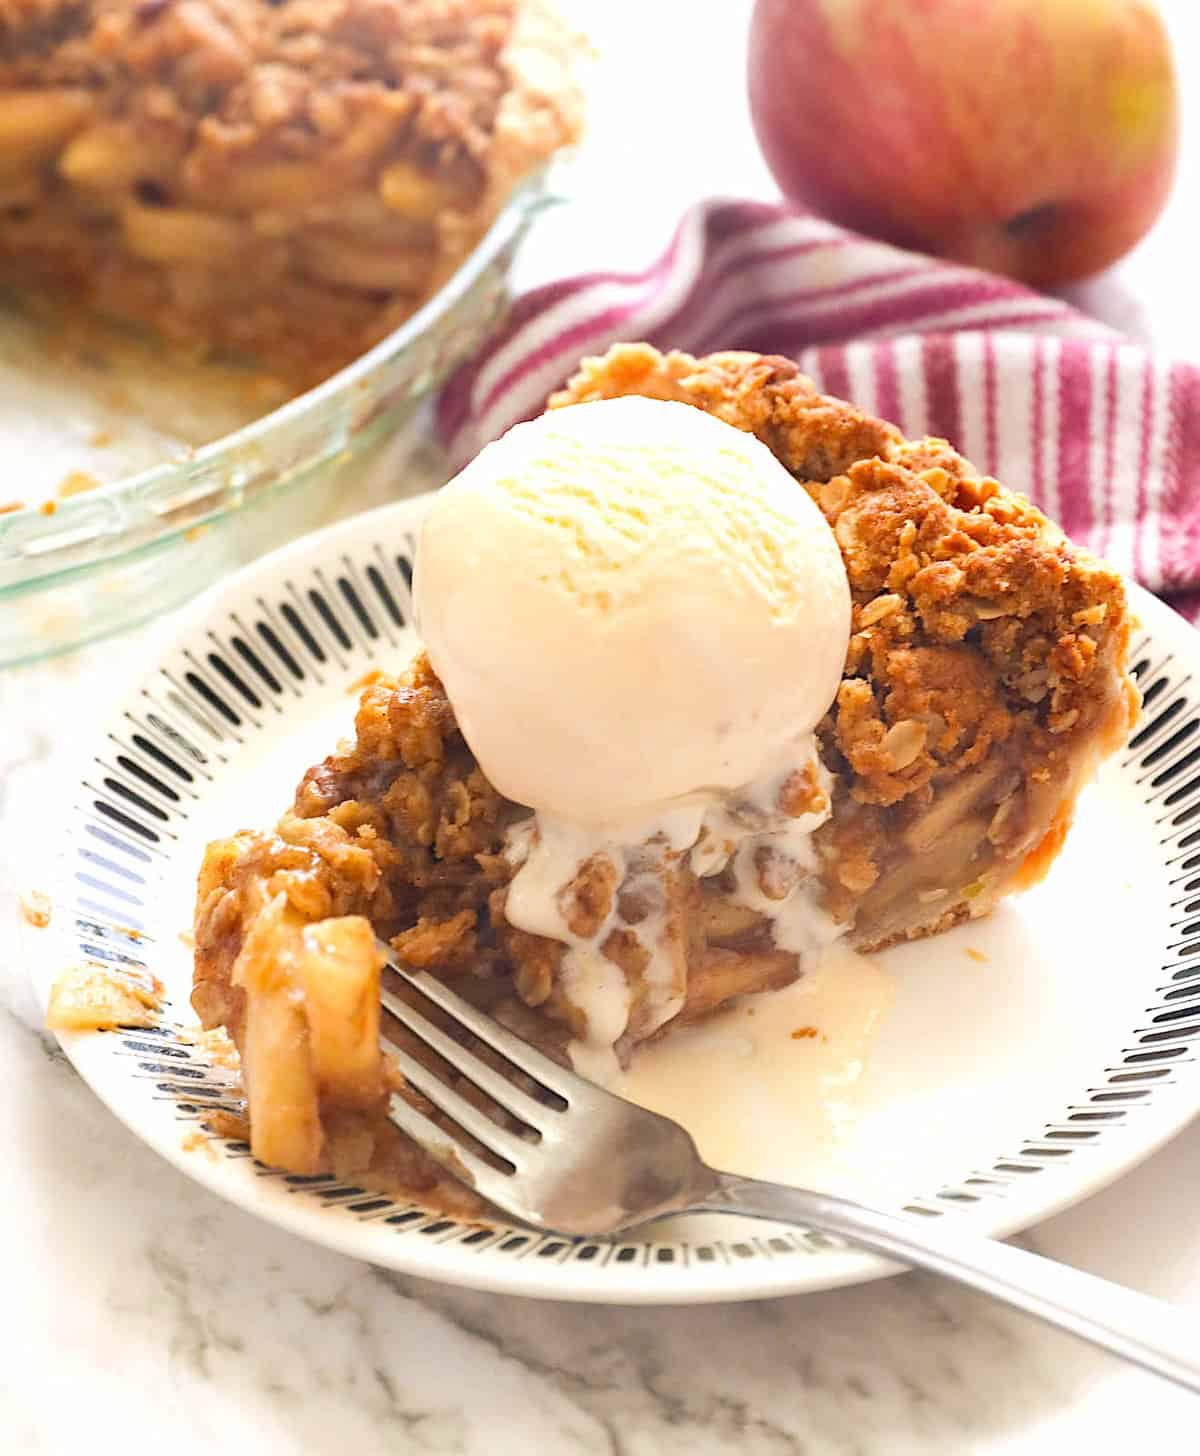 A sweet slice of Dutch apple pie with a refreshing scoop of ice cream